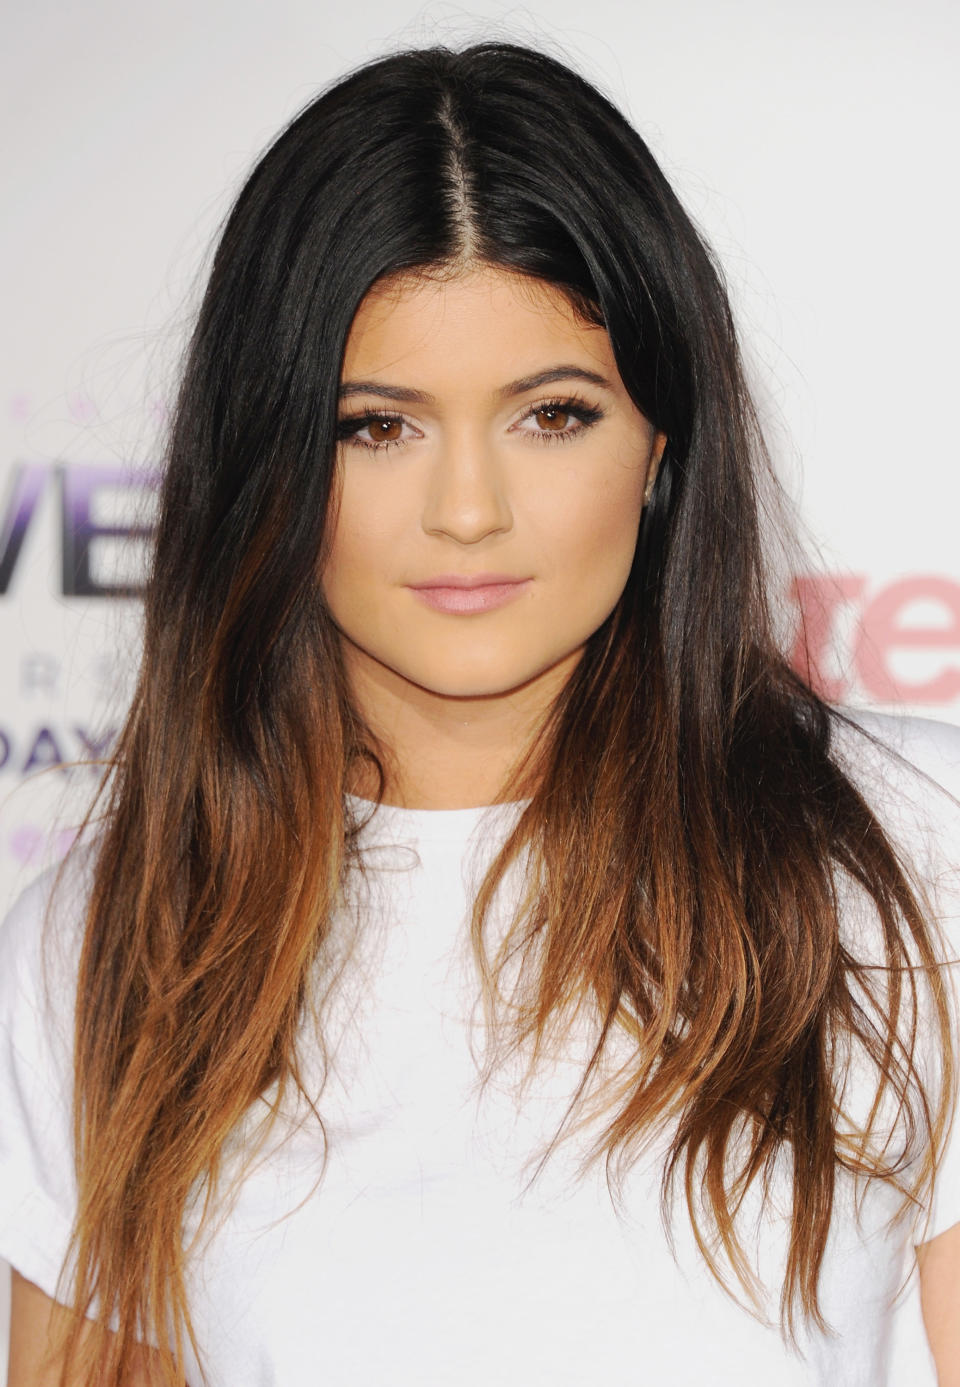 Kylie Jenner antes y ahora/Getyy Images